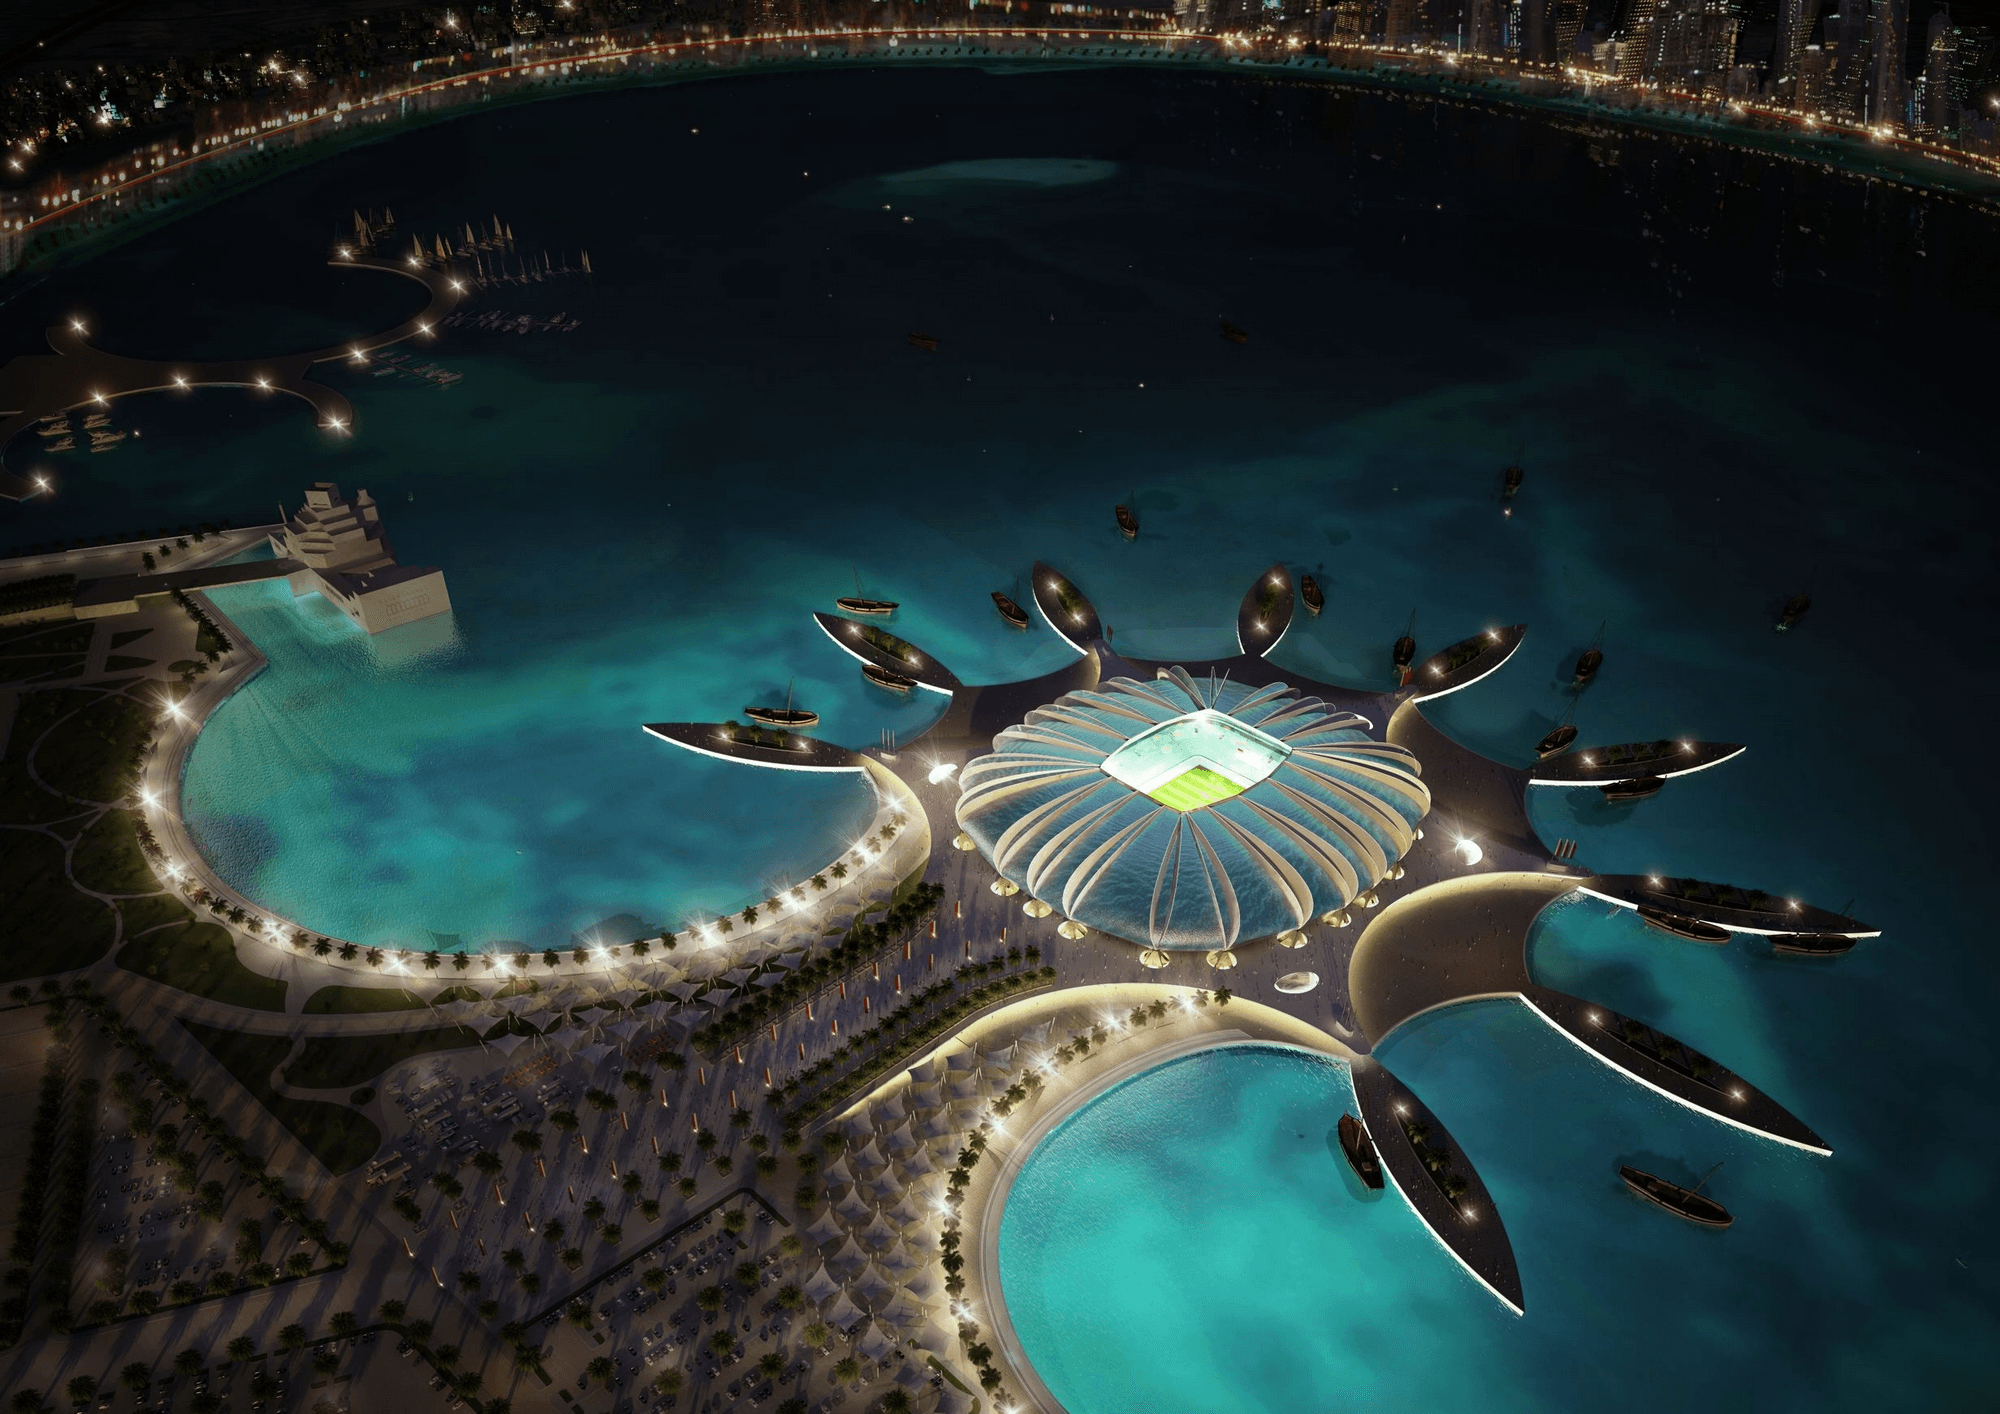 Qatar plans on building this awesome stadium for football's FIFA World